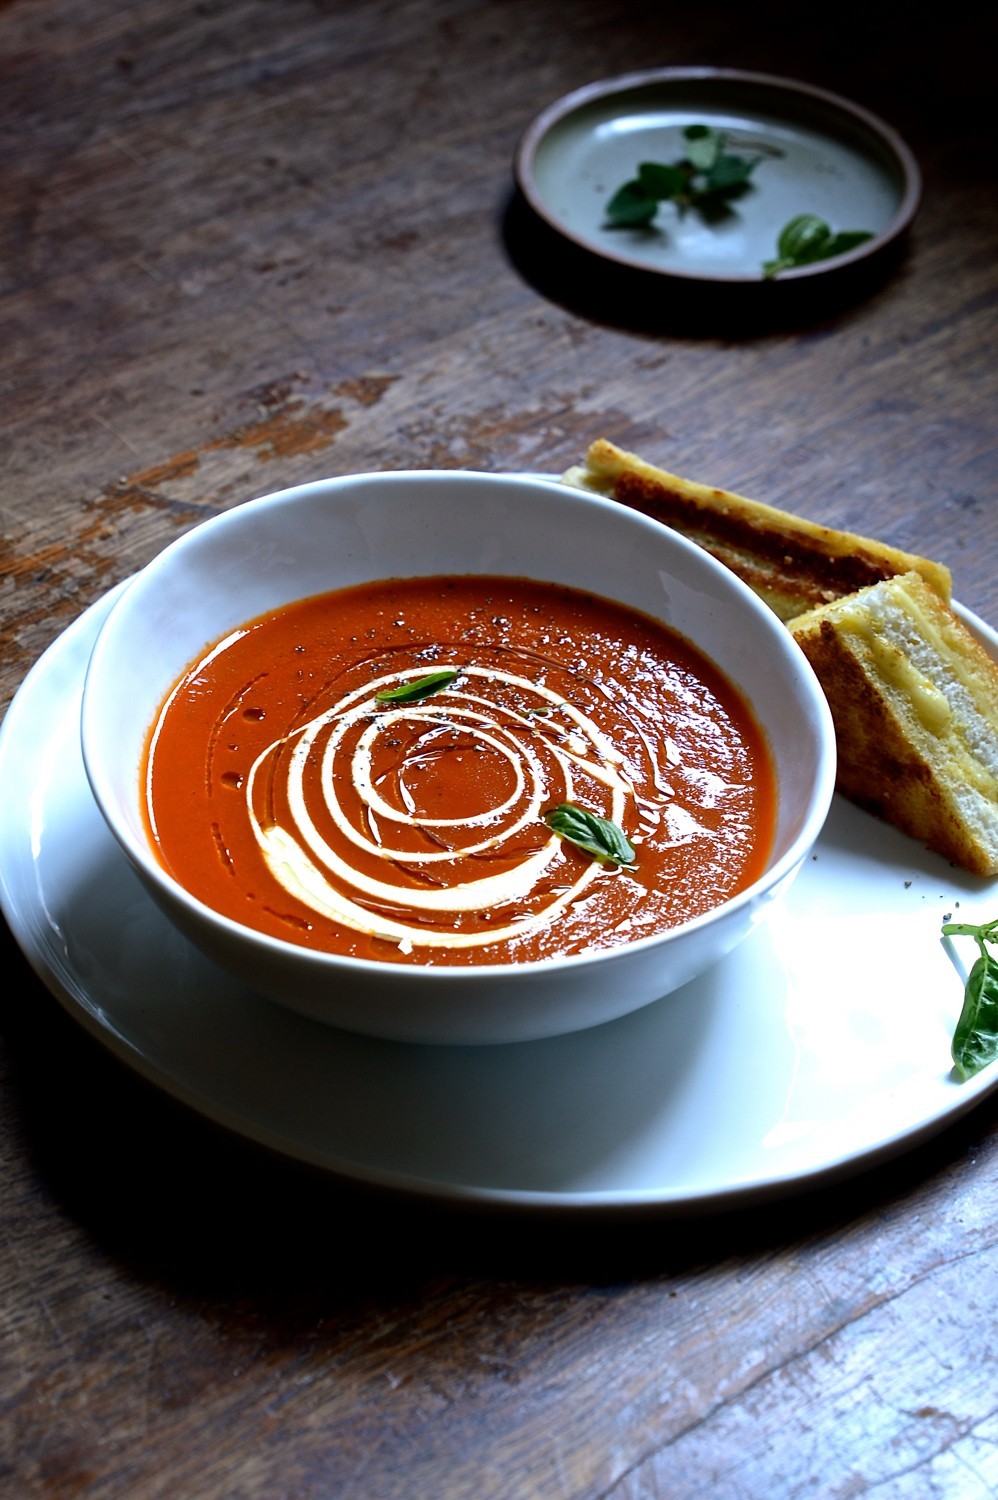 A simple sundried tomato soup